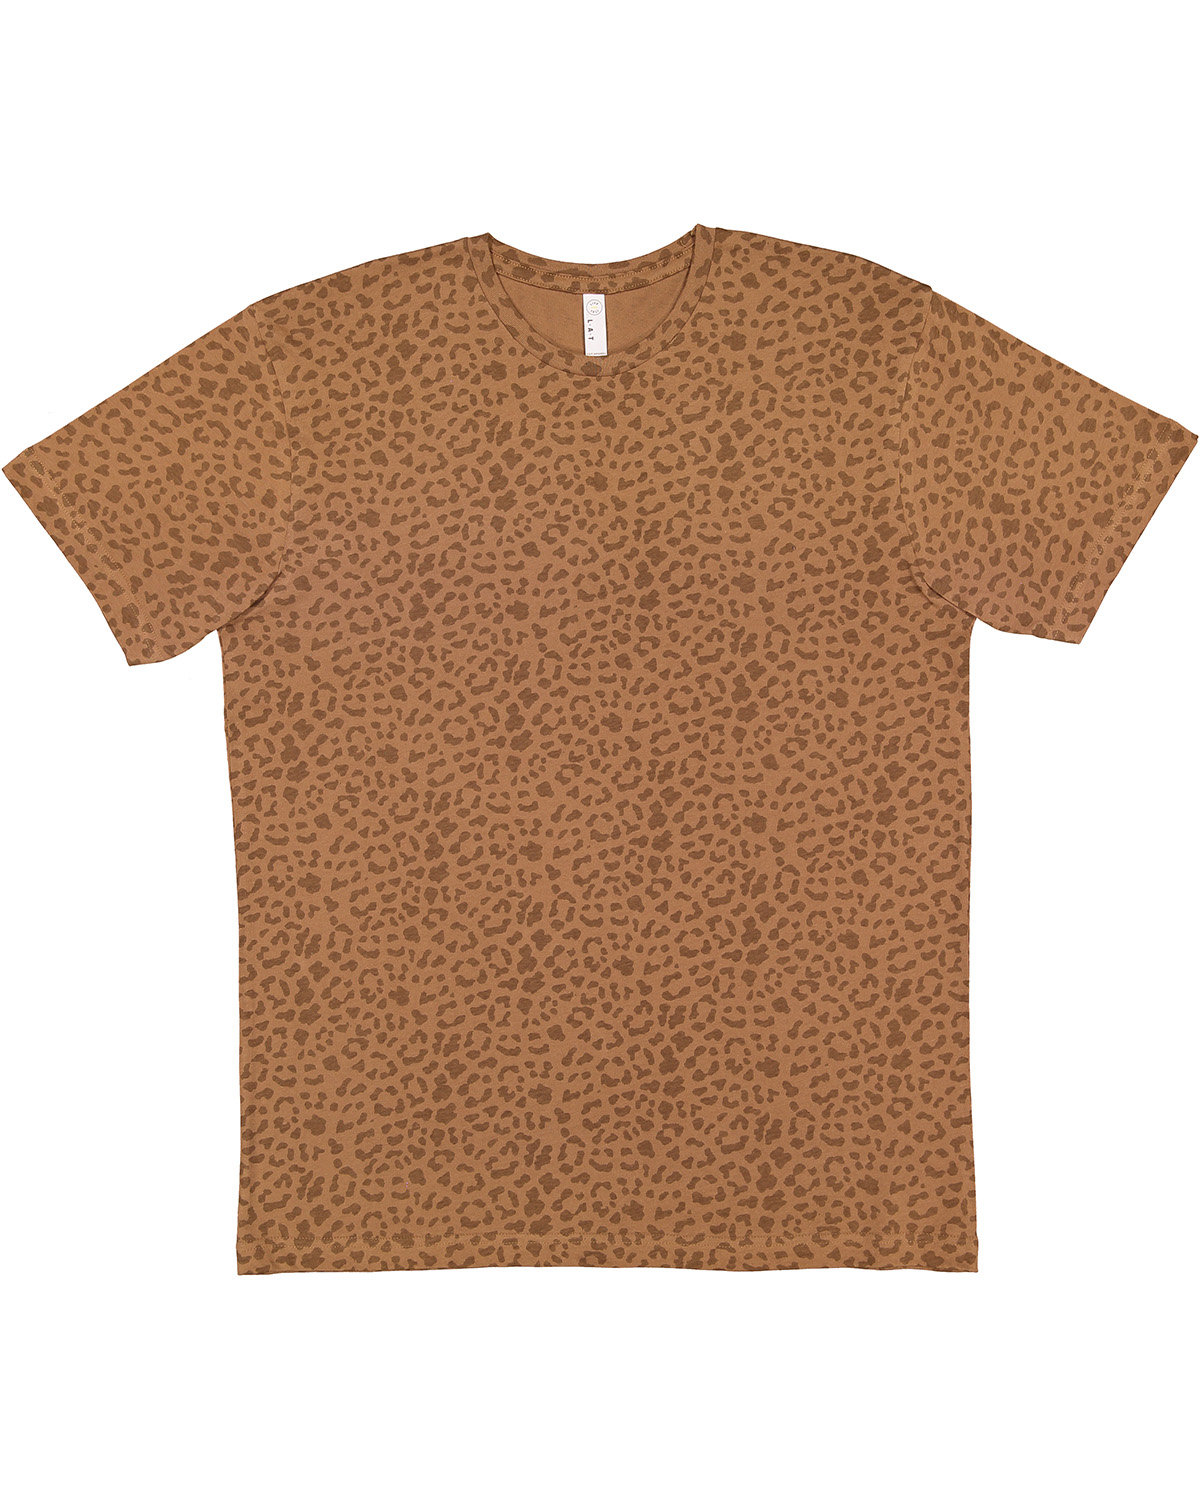 LAT Youth Fine Jersey T-Shirt BROWN LEOPARD 